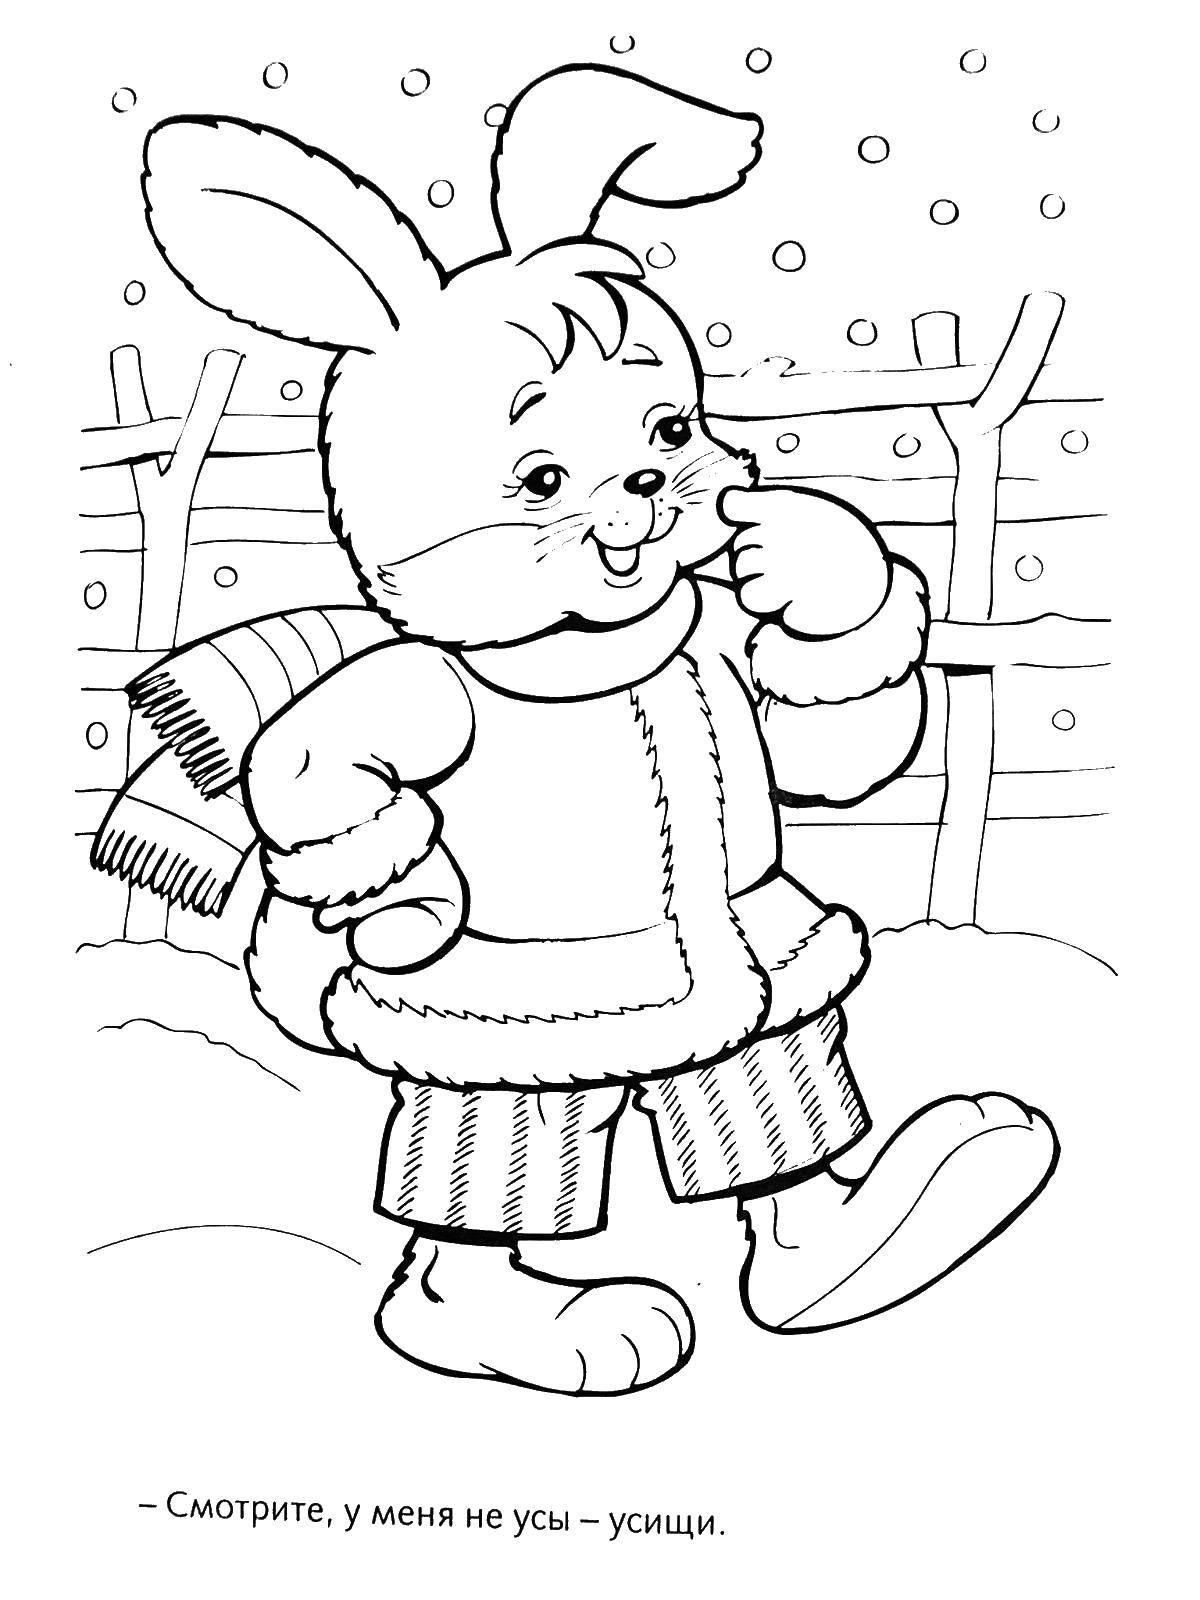 Coloring Bunny with a mustache. Category Fairy tales. Tags:  Bunny, winter.